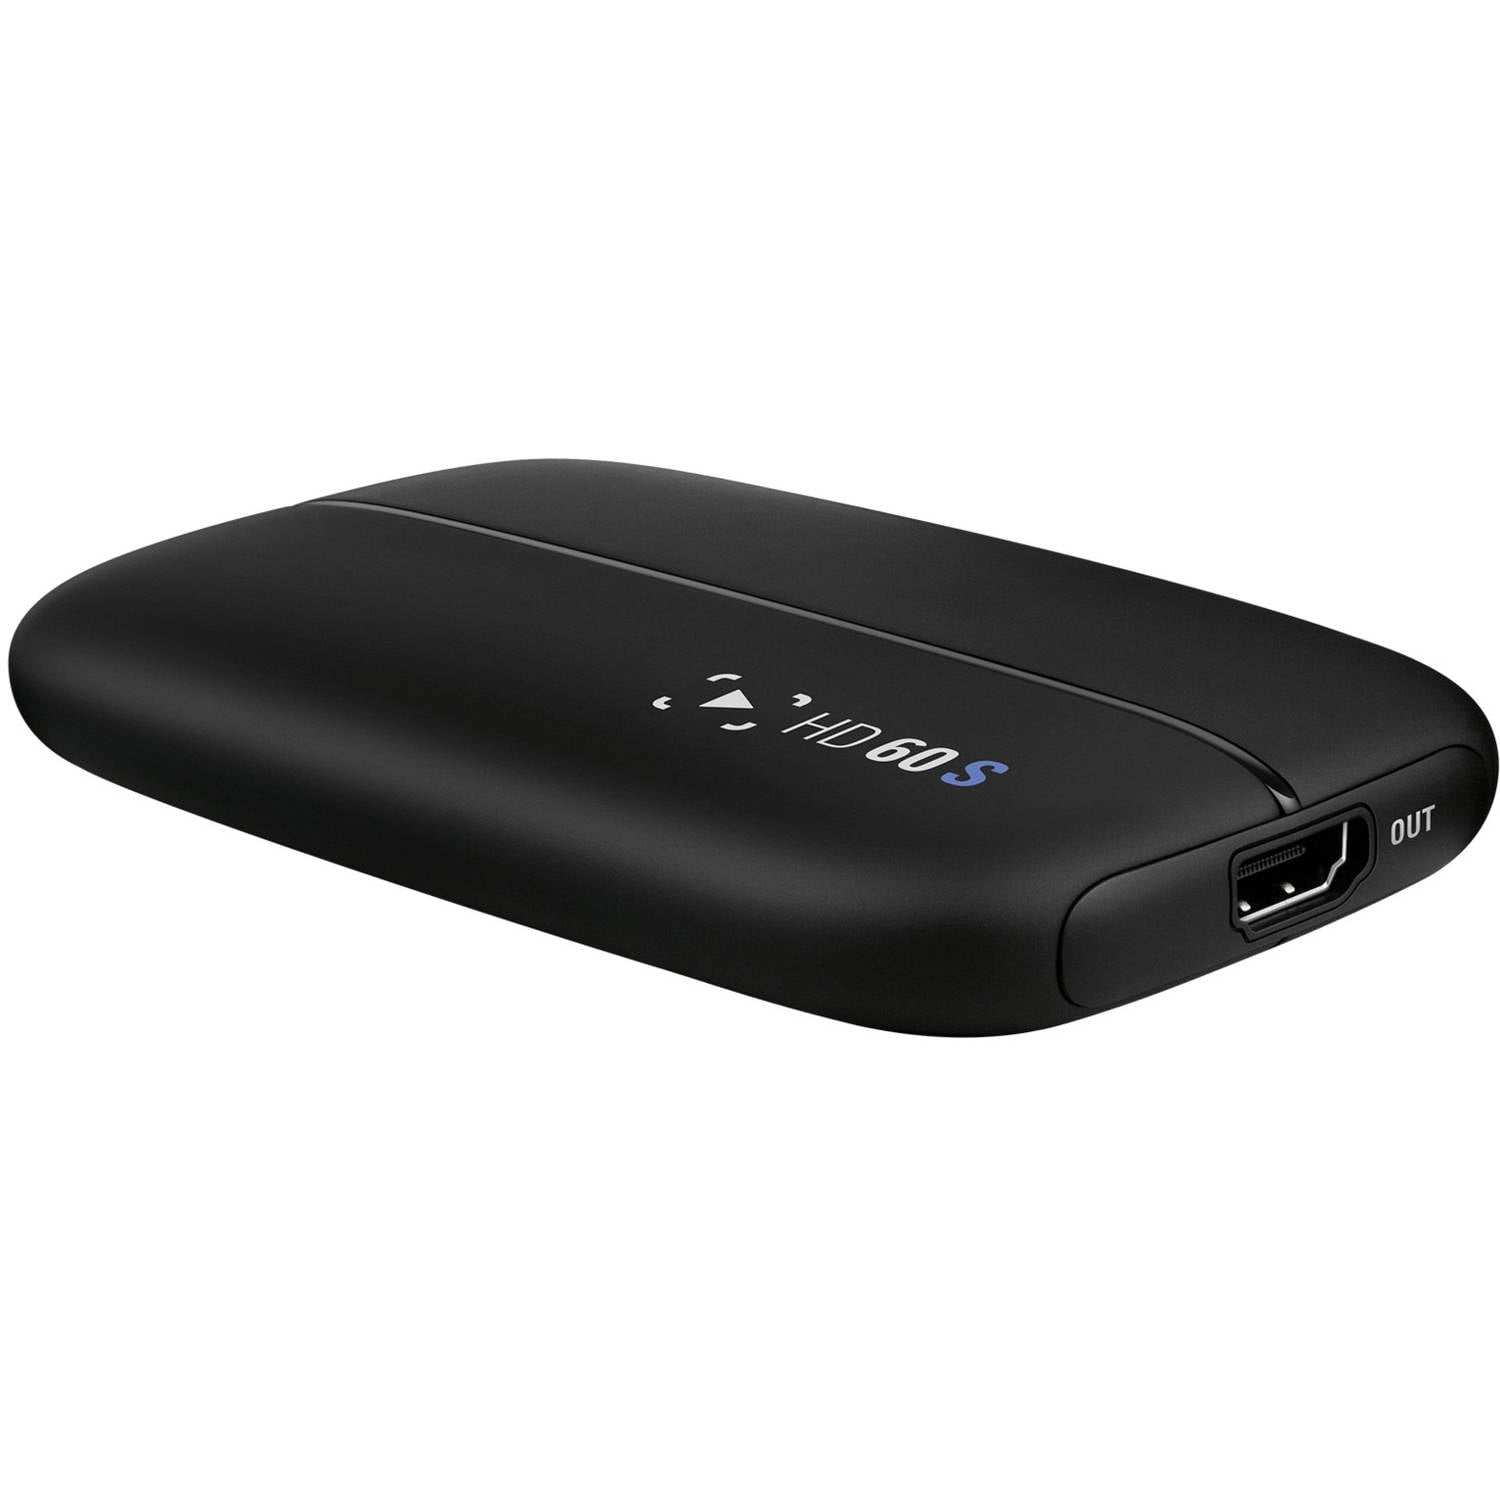 PC/タブレット PC周辺機器 Elgato Game Capture HD60 S - Stream and Record in 1080p60, for PlayStation  4, Xbox One & Xbox 360